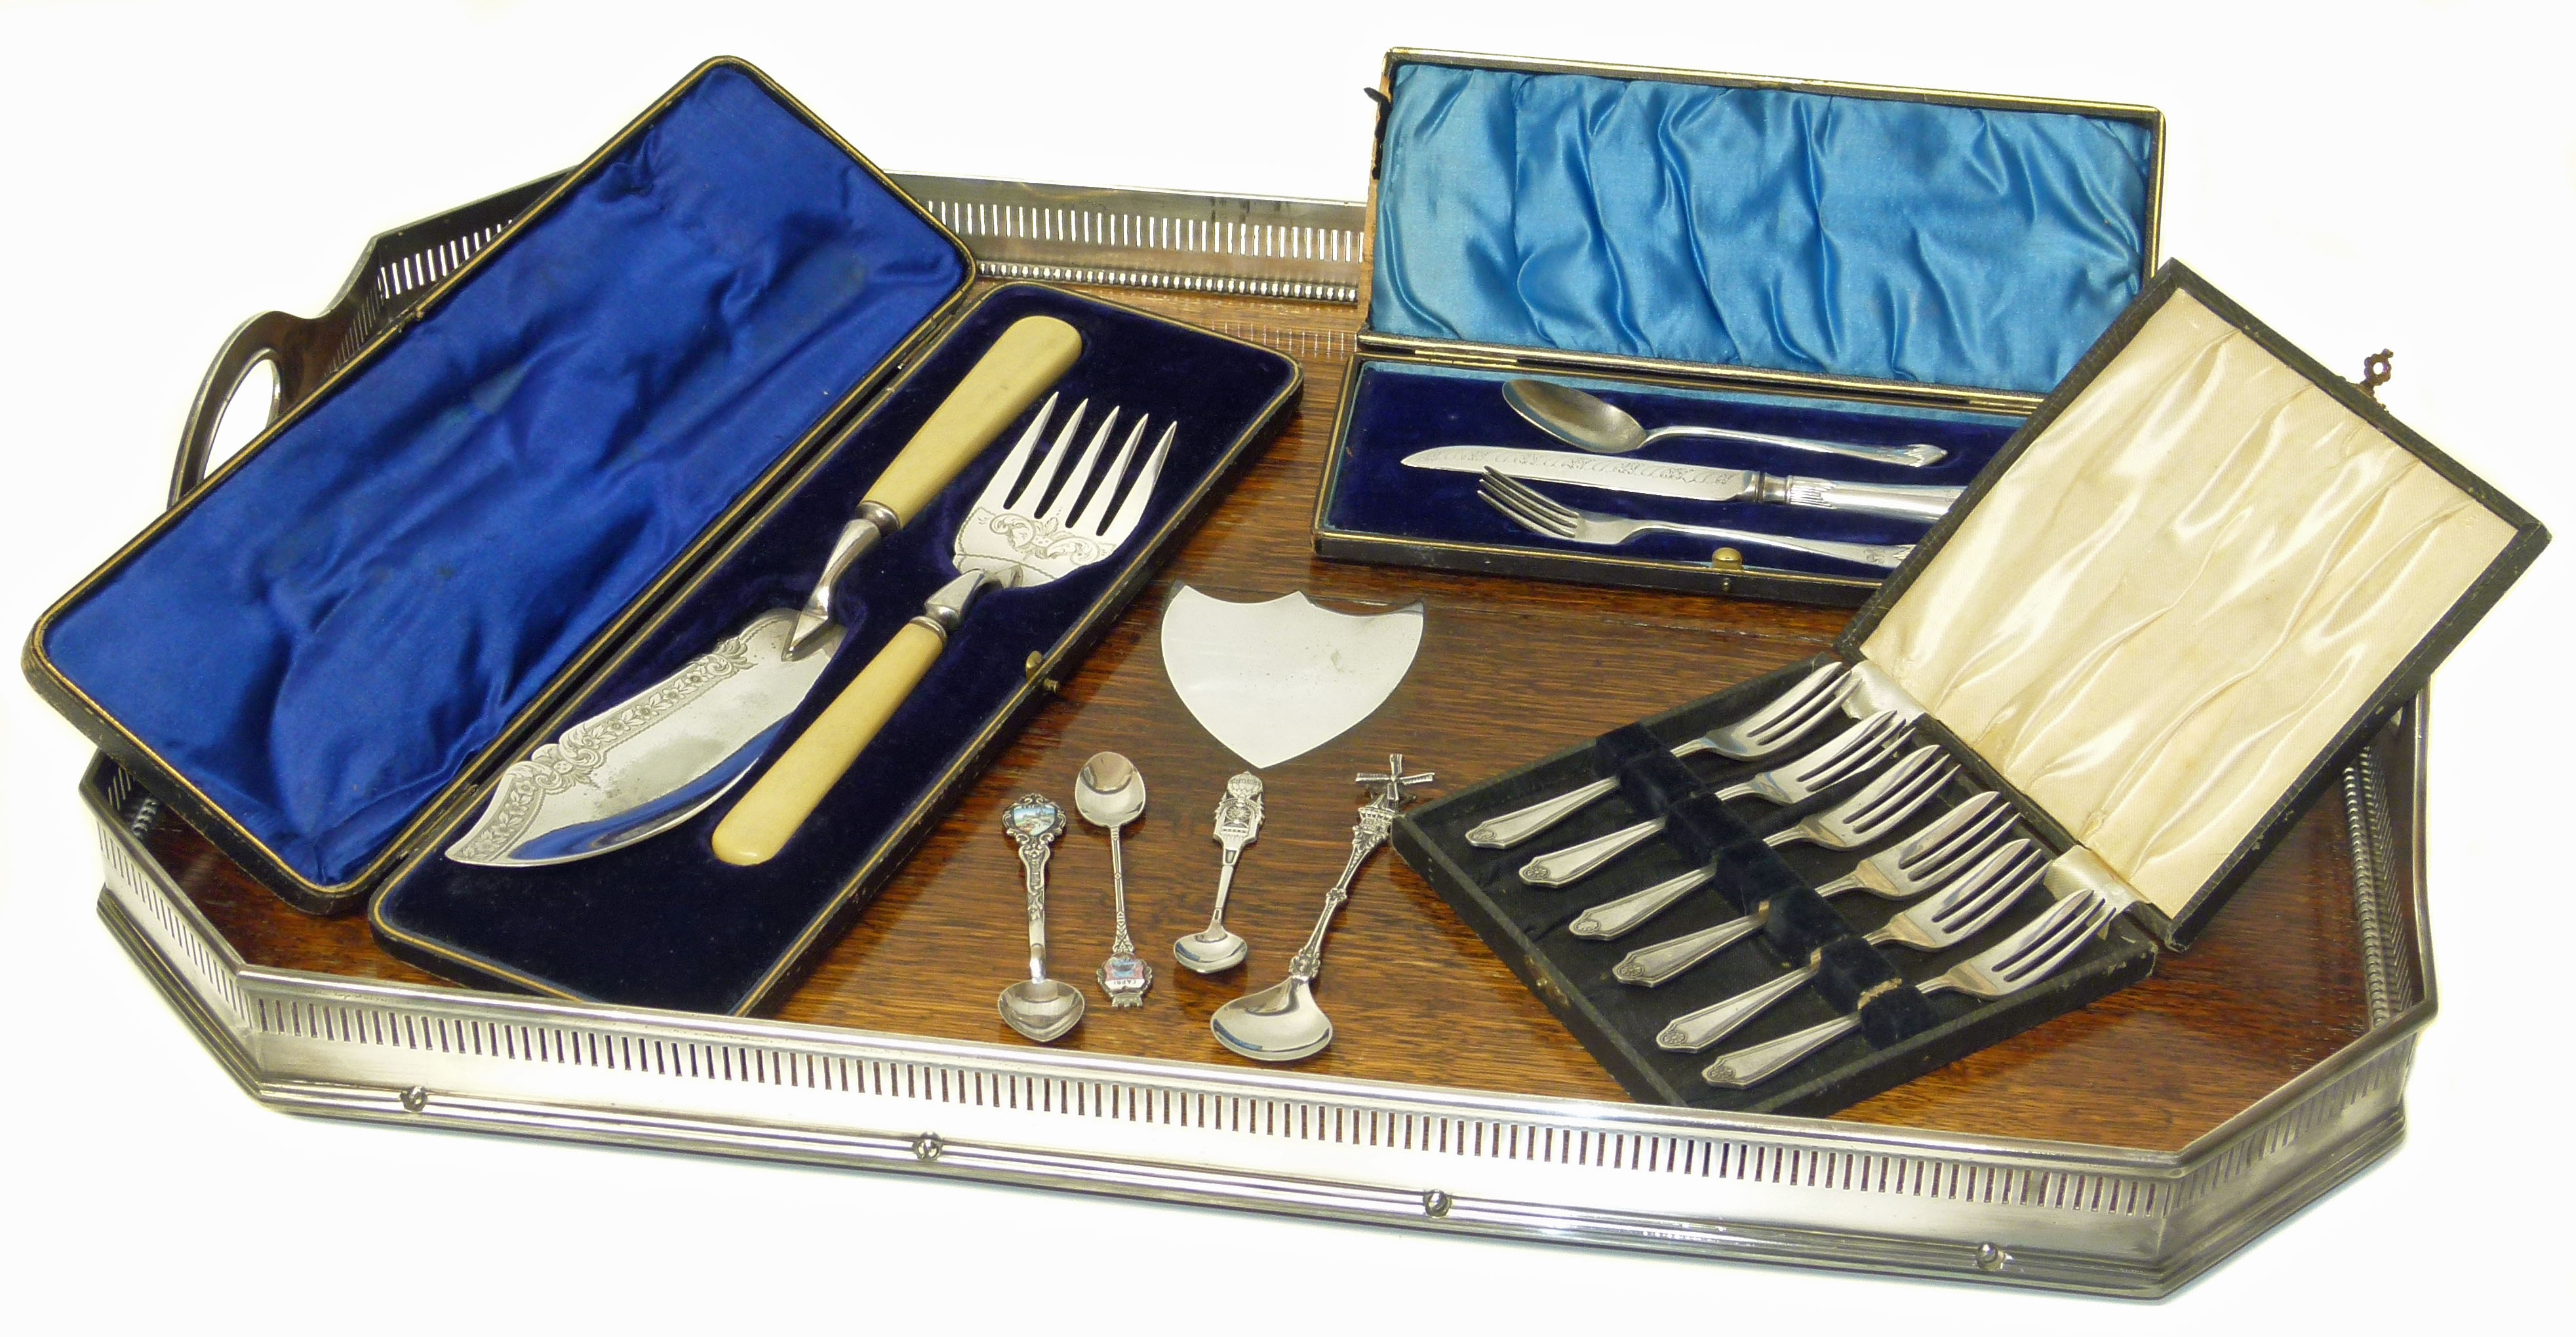 Large plate and wooden tray, Gold & Silversmiths Company, assorted boxed plated cutlery and four